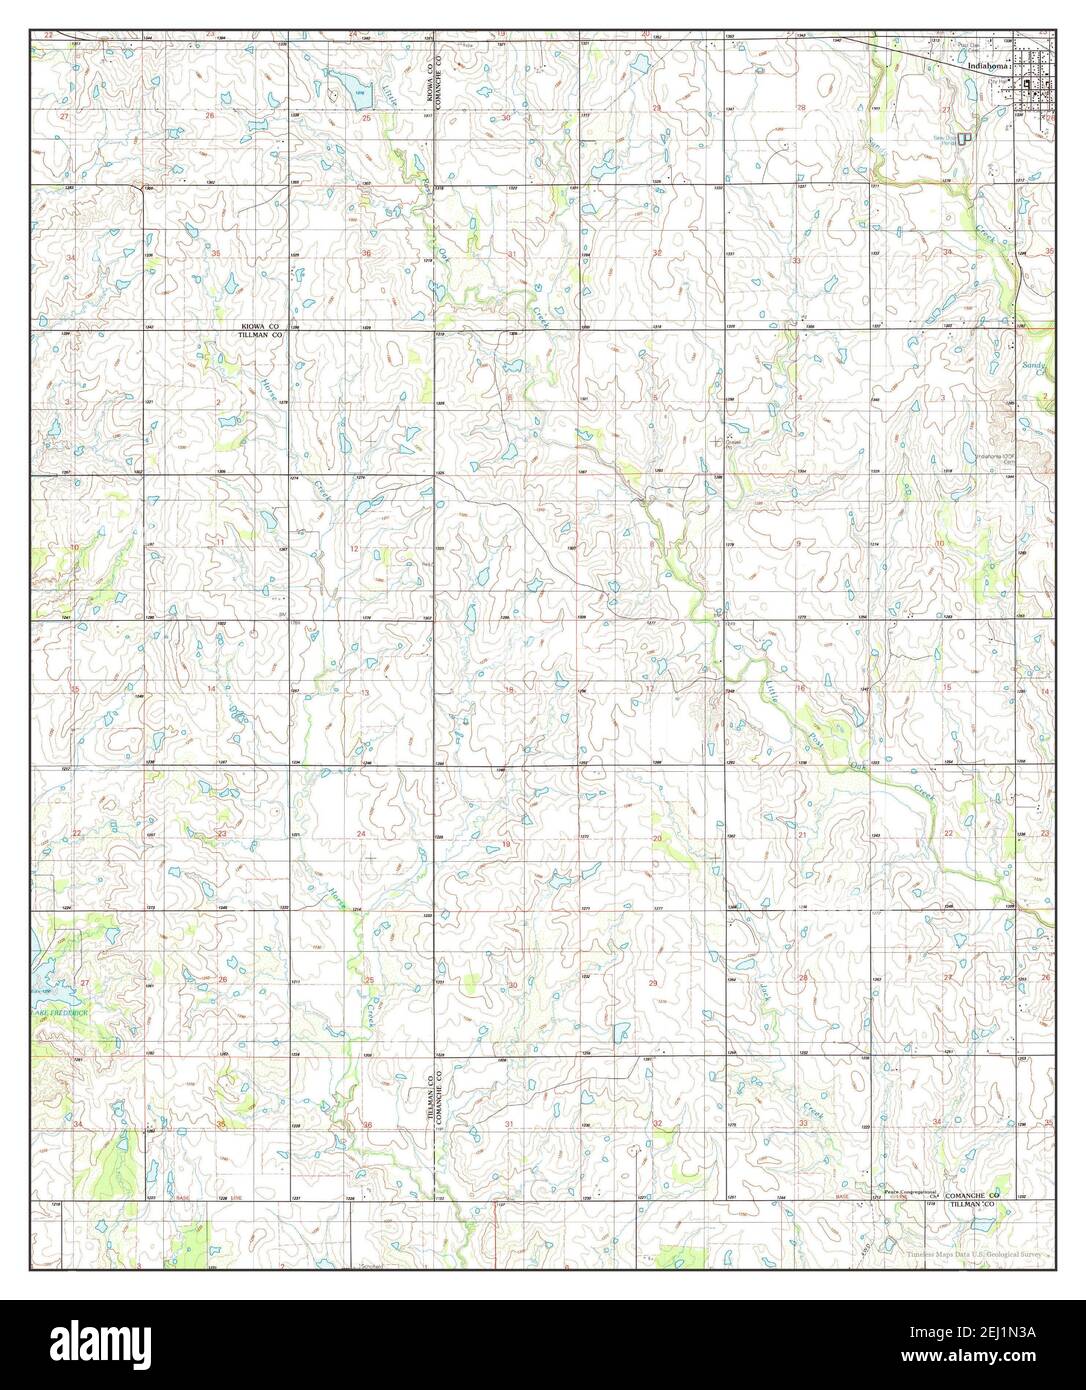 Indiahoma, Oklahoma, map 1991, 1:24000, United States of America by Timeless Maps, data U.S. Geological Survey Foto Stock